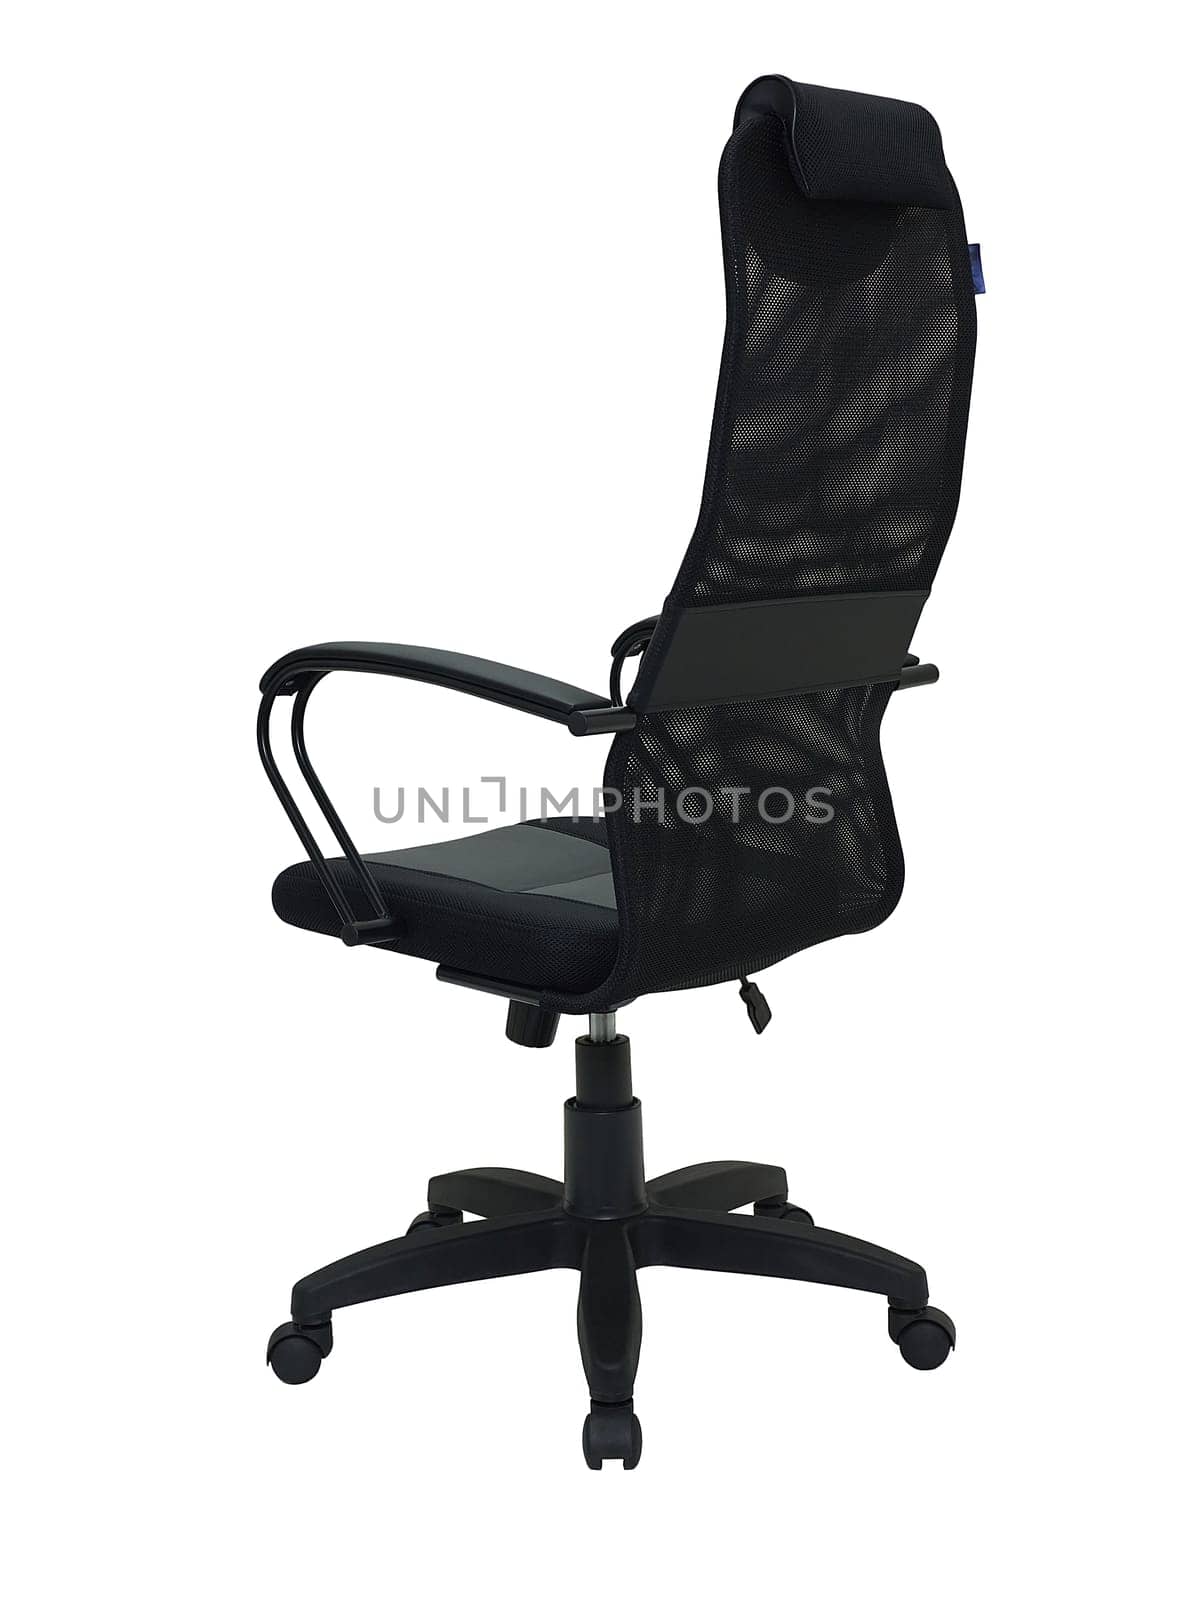 black office armchair on wheels isolated on white background, back view. furniture in minimal style